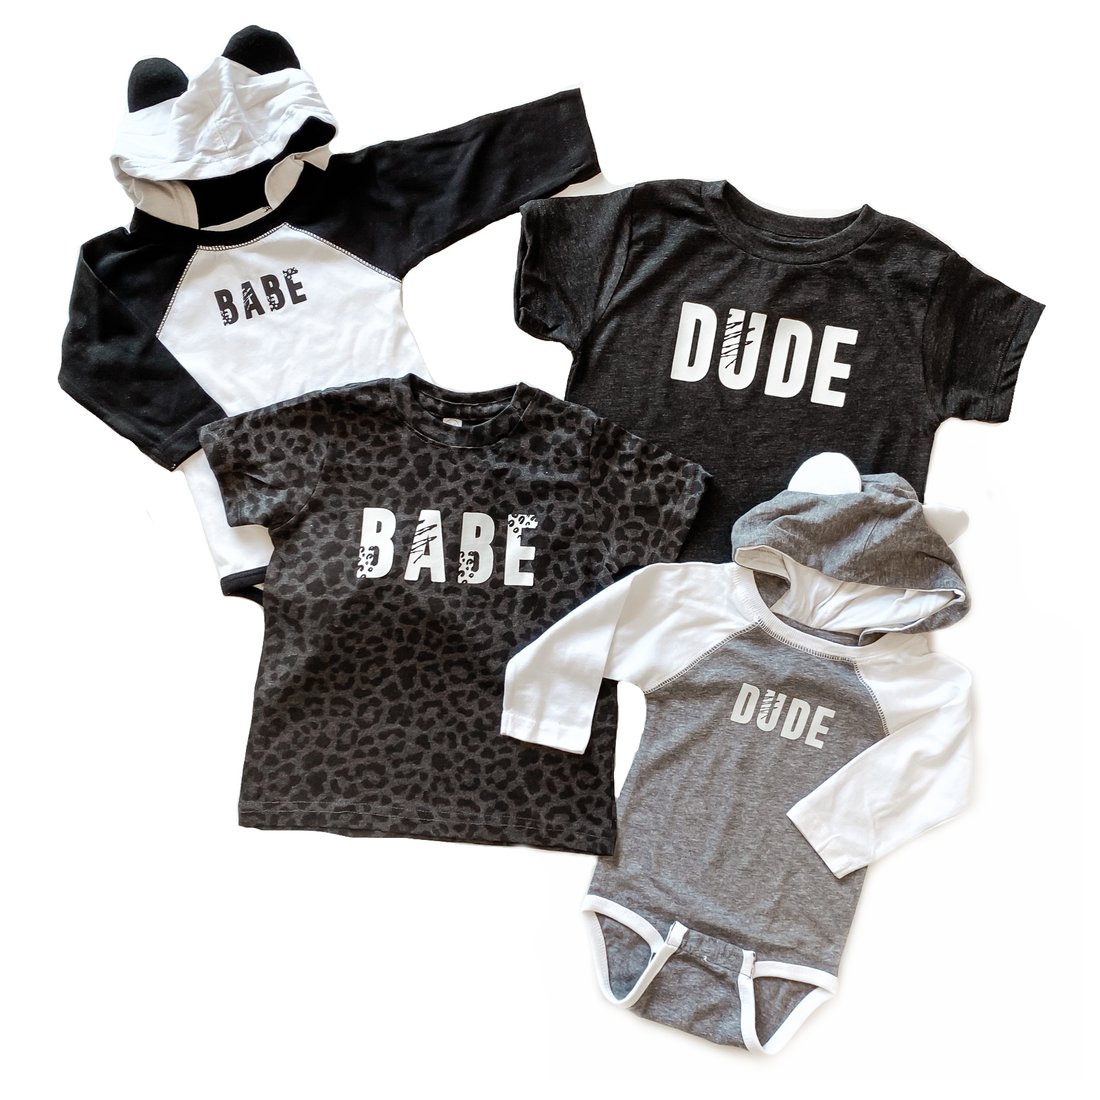 BABE Black Leopard Kids Tee [ships in 3-5 business days]